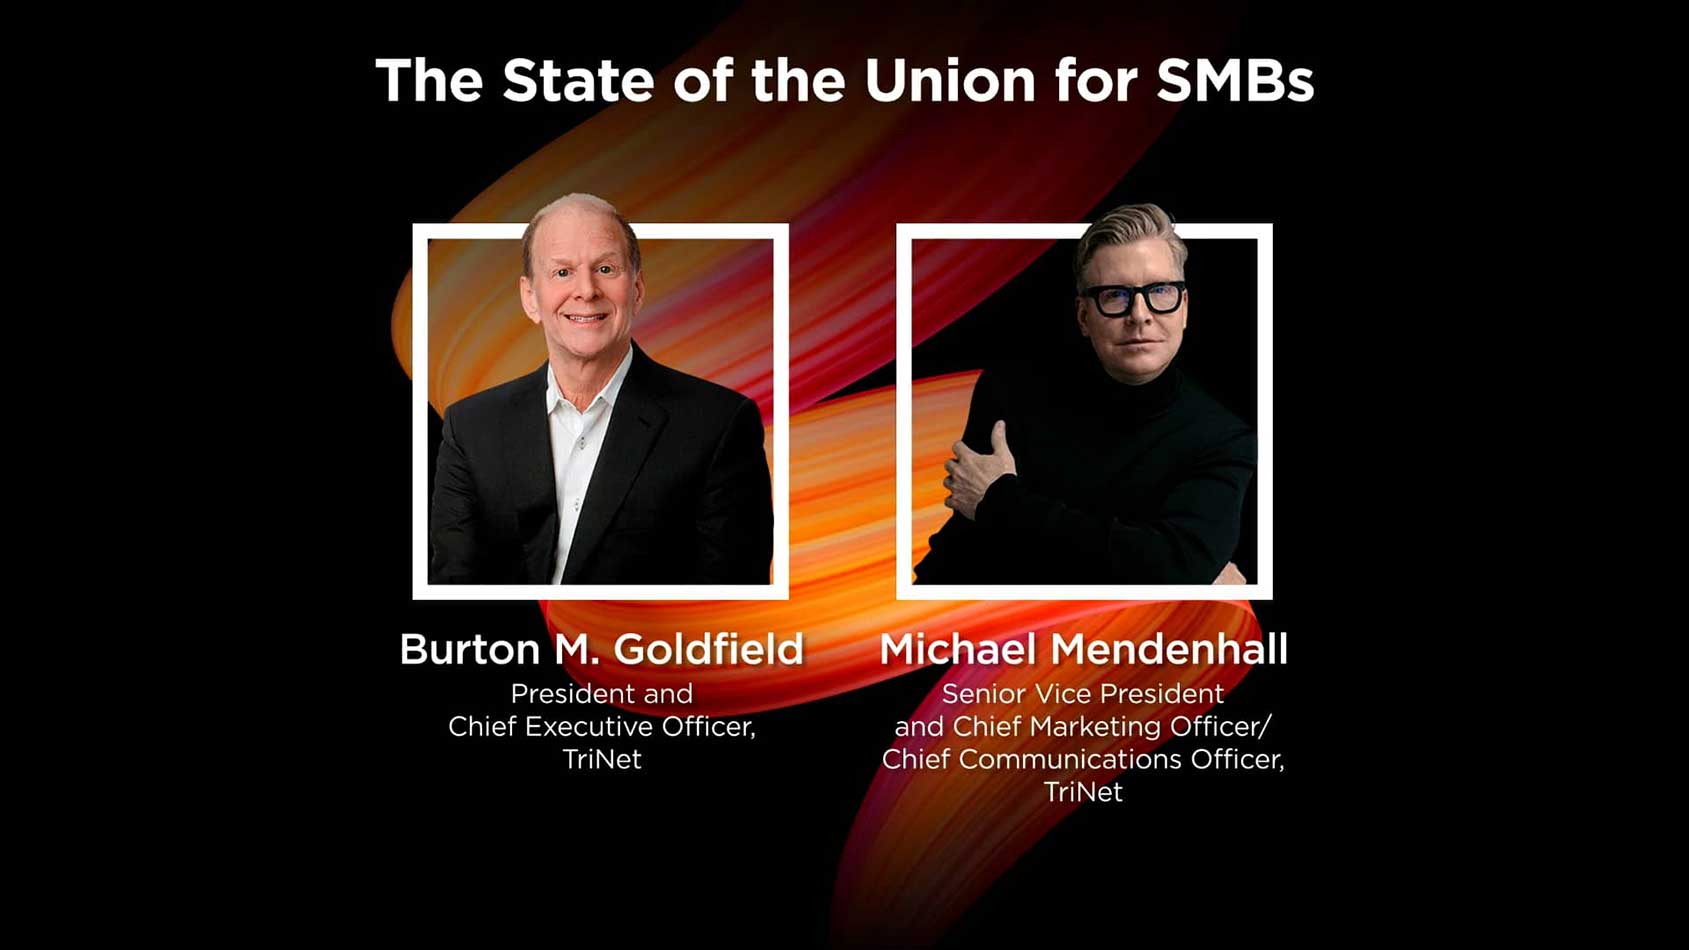 The State of the Union for SMBs